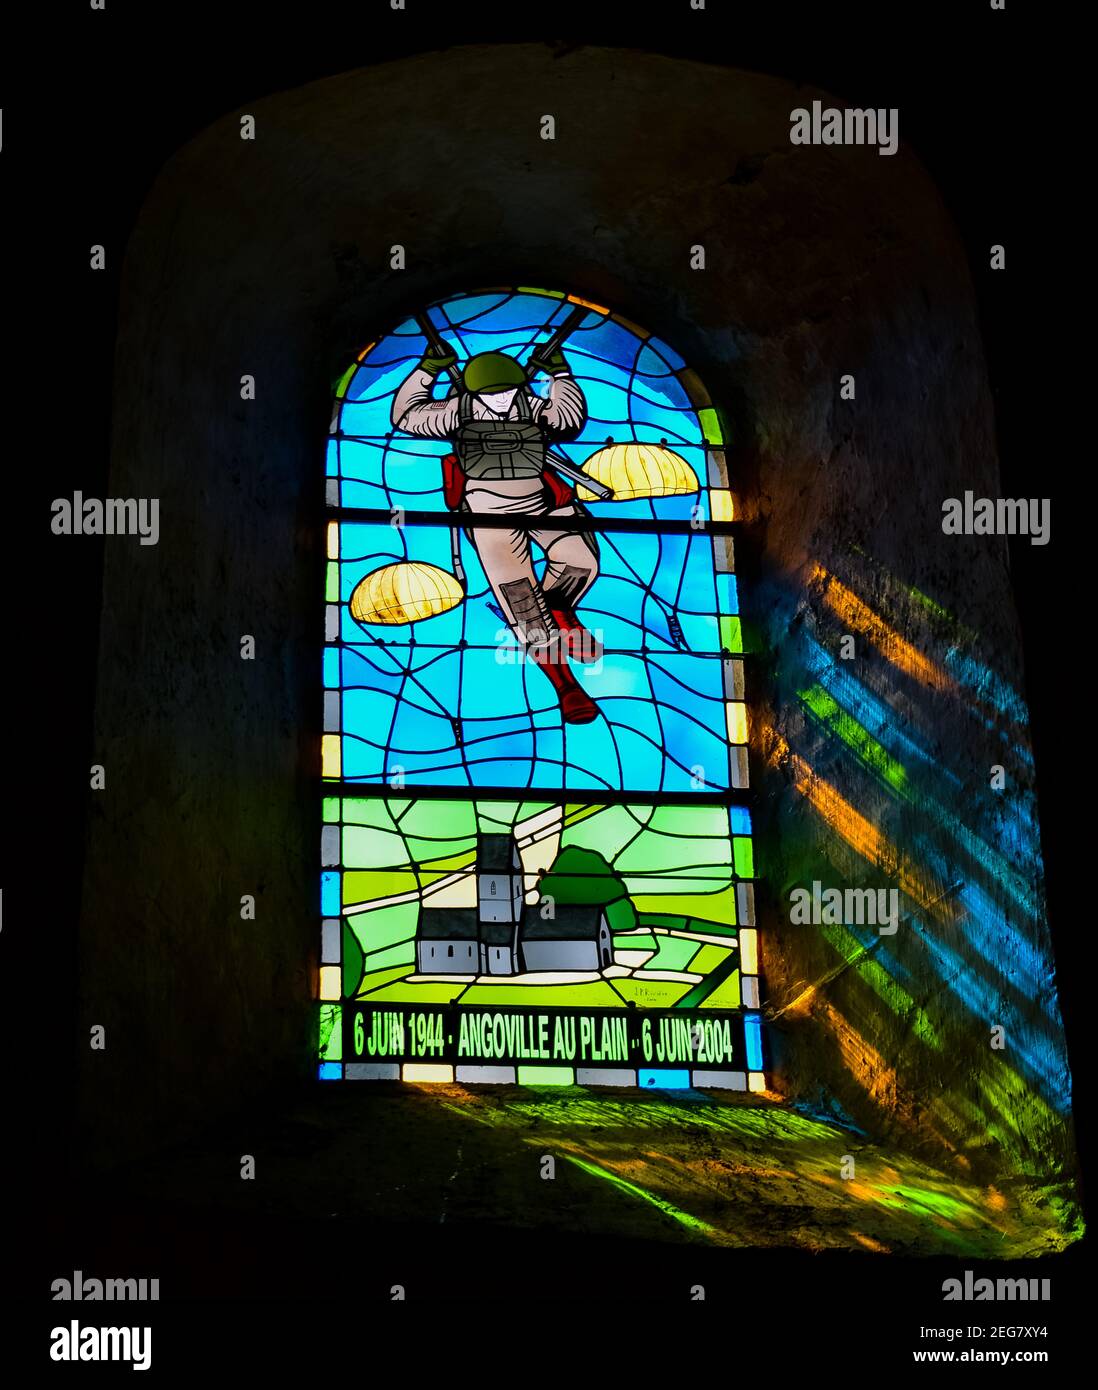 NORMANDY, FRANCE - July 4, 2017: Stained glass window in the Church Saint-Côme-et-Saint-Damien Angoville-au-Plain, with paratrooper from the battle of Stock Photo